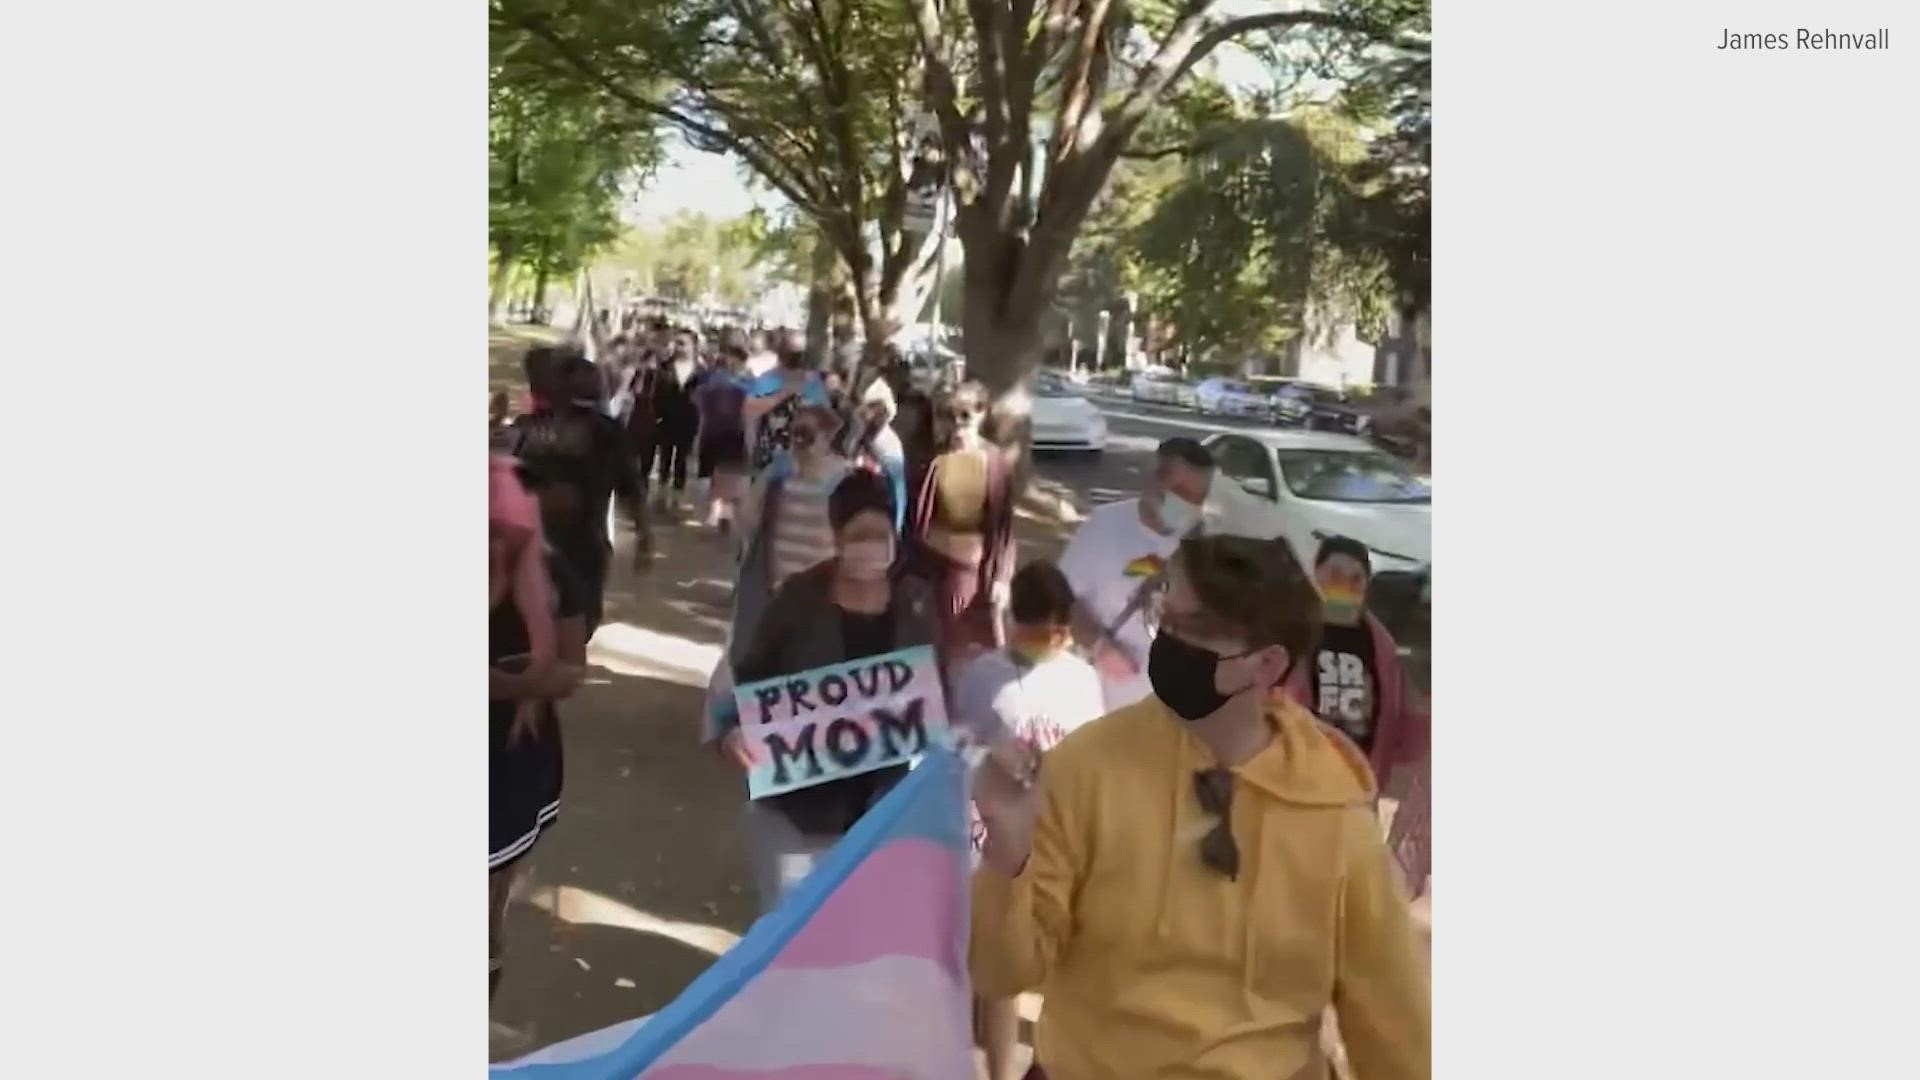 Dozens came out on Saturday afternoon to show their support and advocate for each other at the Trans Visibility March, a national event in its 3rd year.